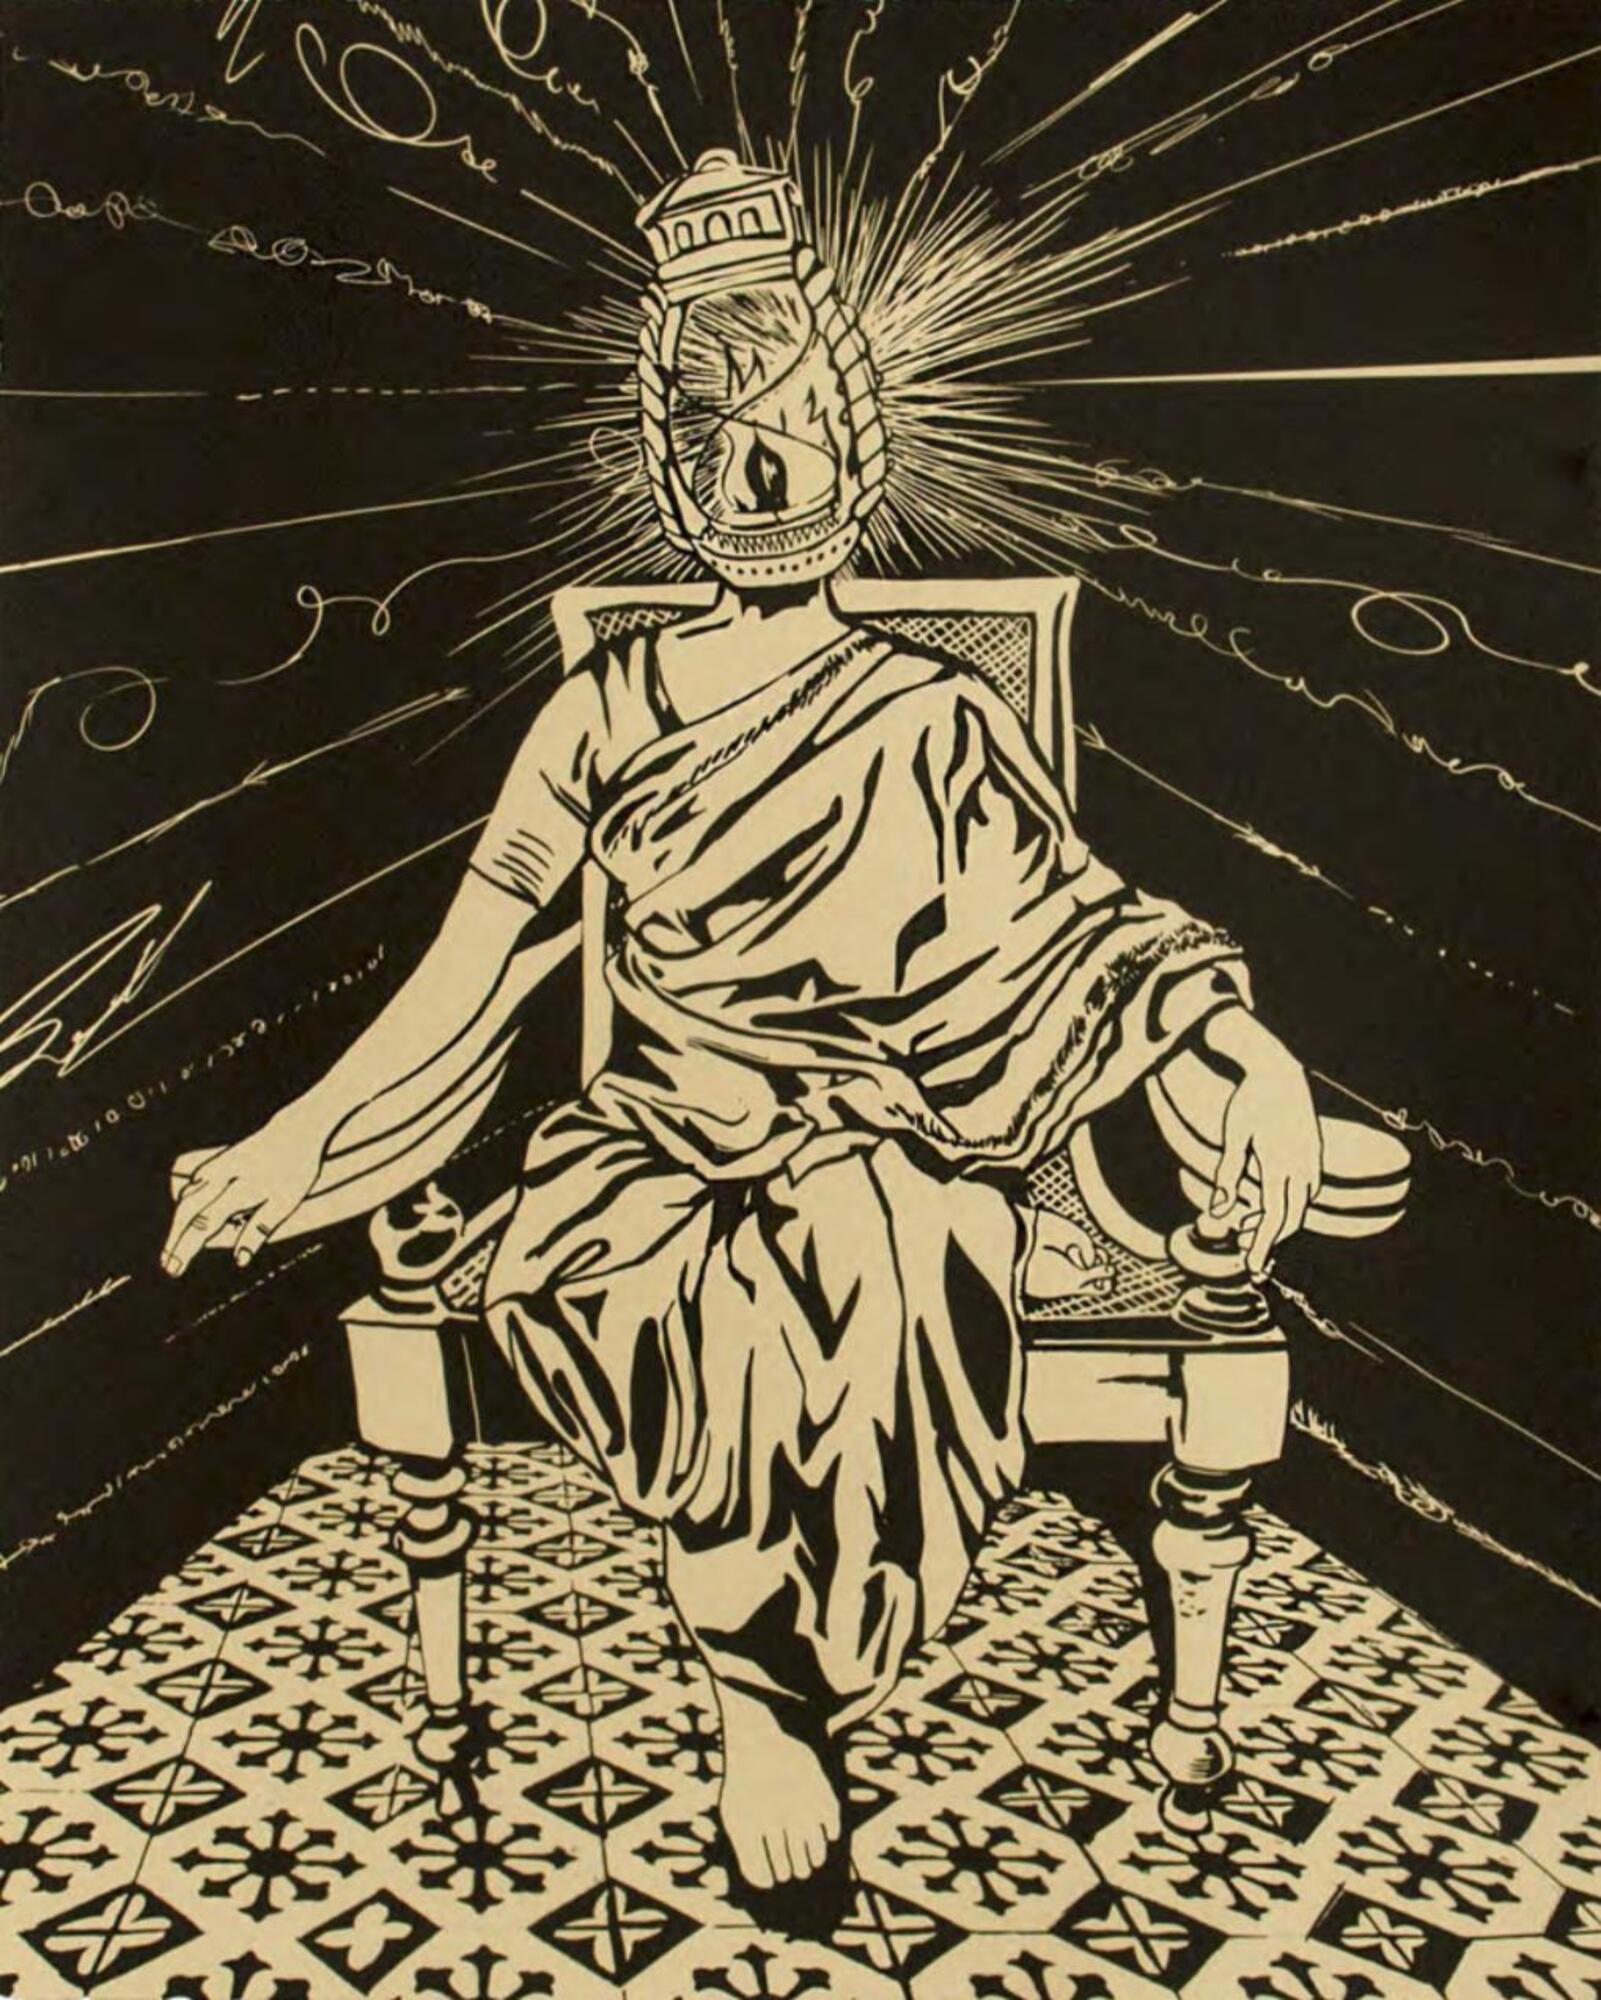 No. 26 of a series of 27 prints. A simple, two-tone palette. A human figure with a glowing, lantern shaped head, sits in an armchair facing the viewing. One leg is tucked under the other, they are barefoot and wearing a draped, robe garment. The chair sits on a patterned floor and is surrounded by blackness interrupted by squiggled lines.<br />
Sultana&#39;s Dream was printed and published by Durham Press in 2018.